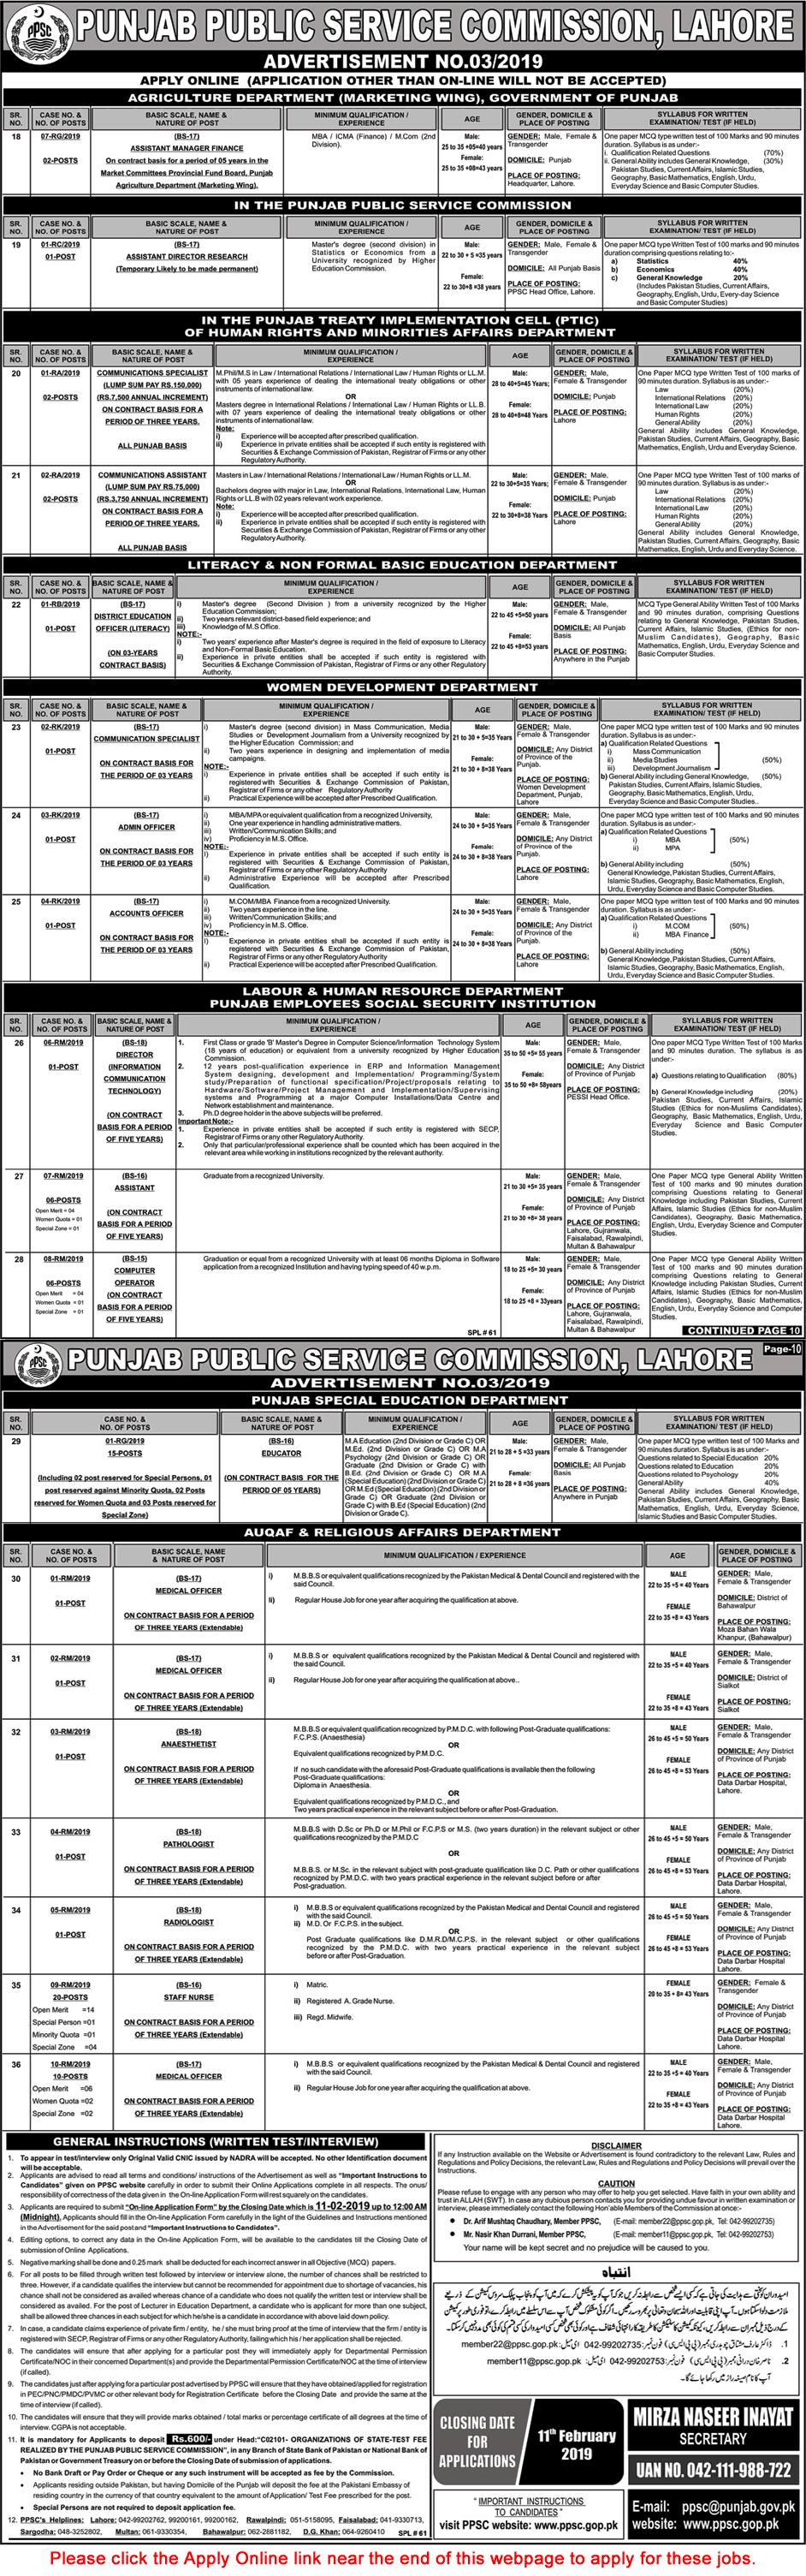 PPSC Jobs January 2019 Apply Online Consolidated Advertisement No 03/2019 3/2019 Latest